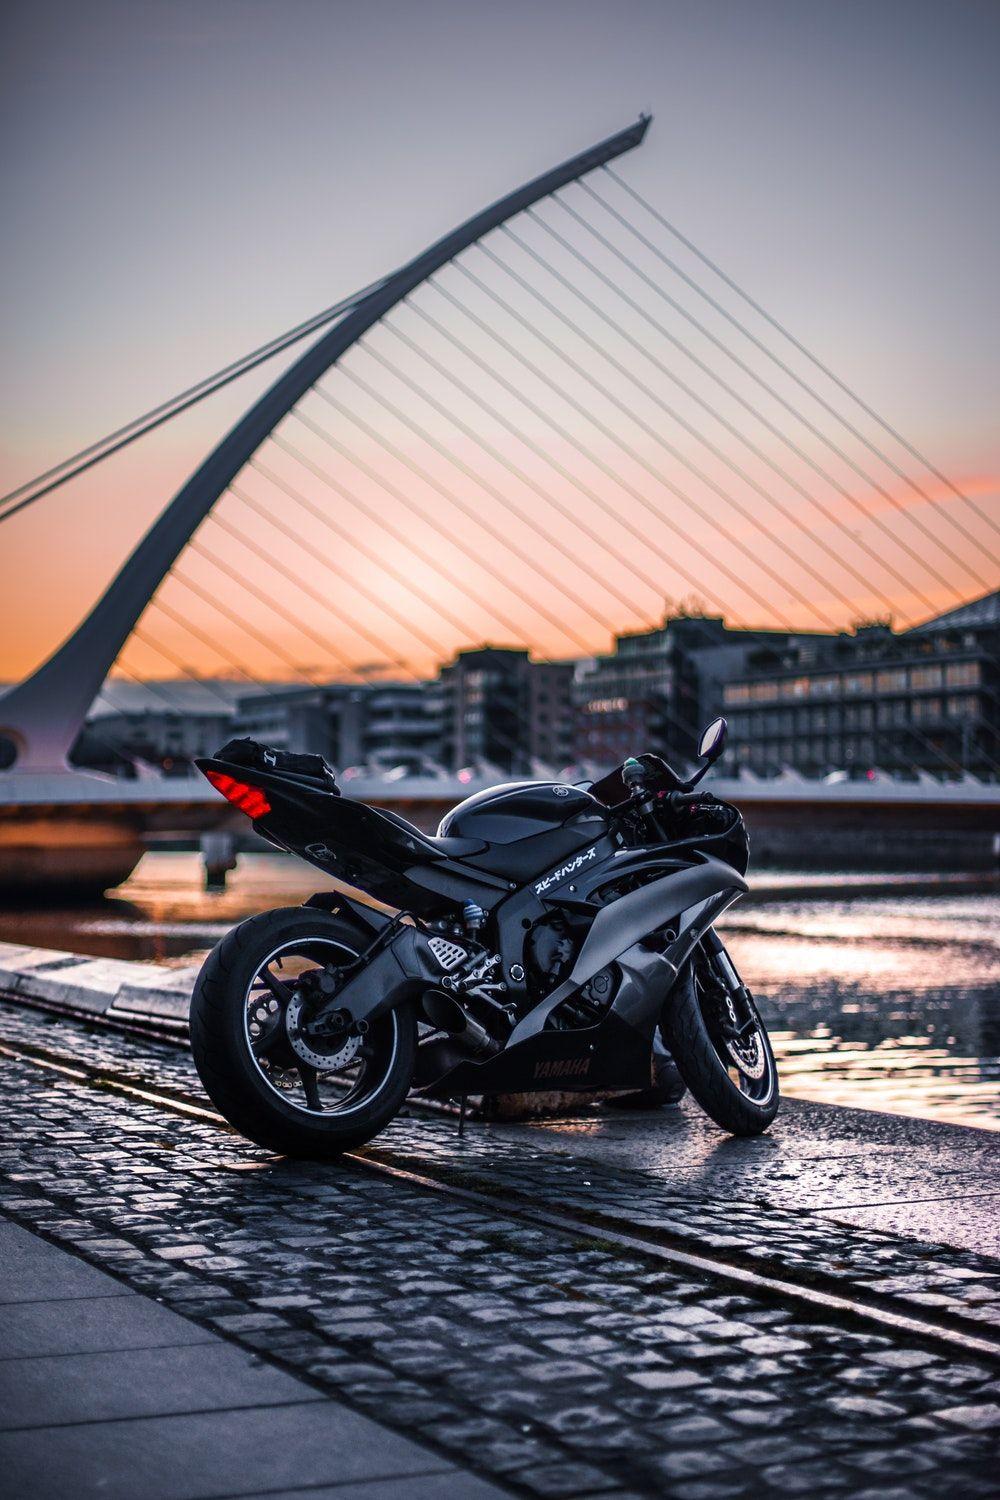 Moto Picture [HD]. Download Free Image